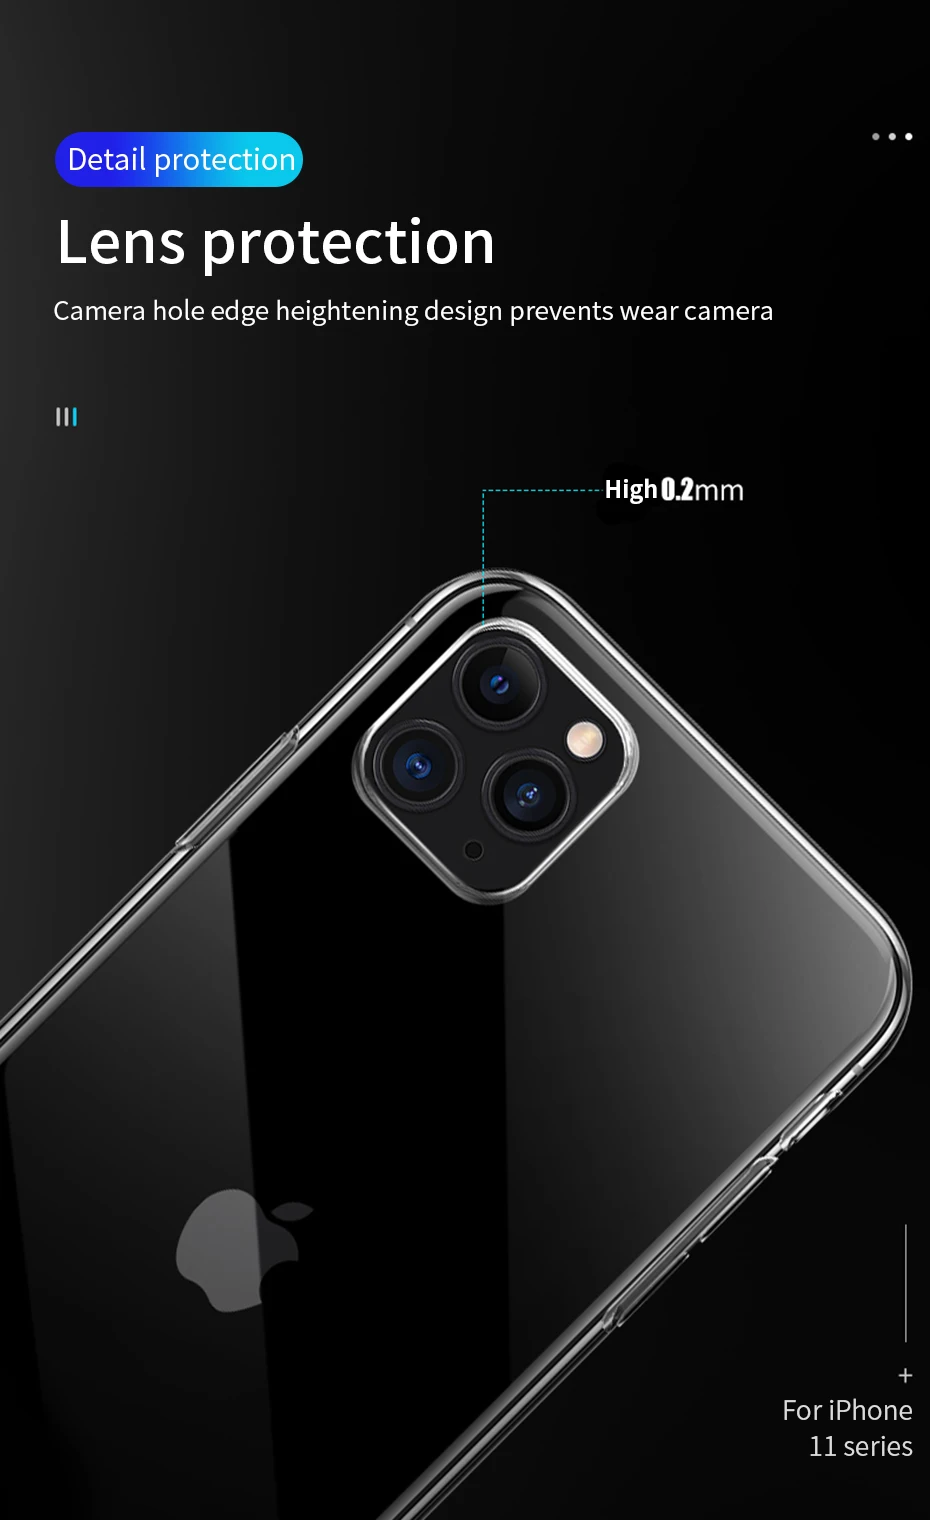 HOCO HD Transparent Protective Case for iPhone 11 2019 Series TPU Clear Ultra Thin Case Full Cover for iPhone 11 Pro Max